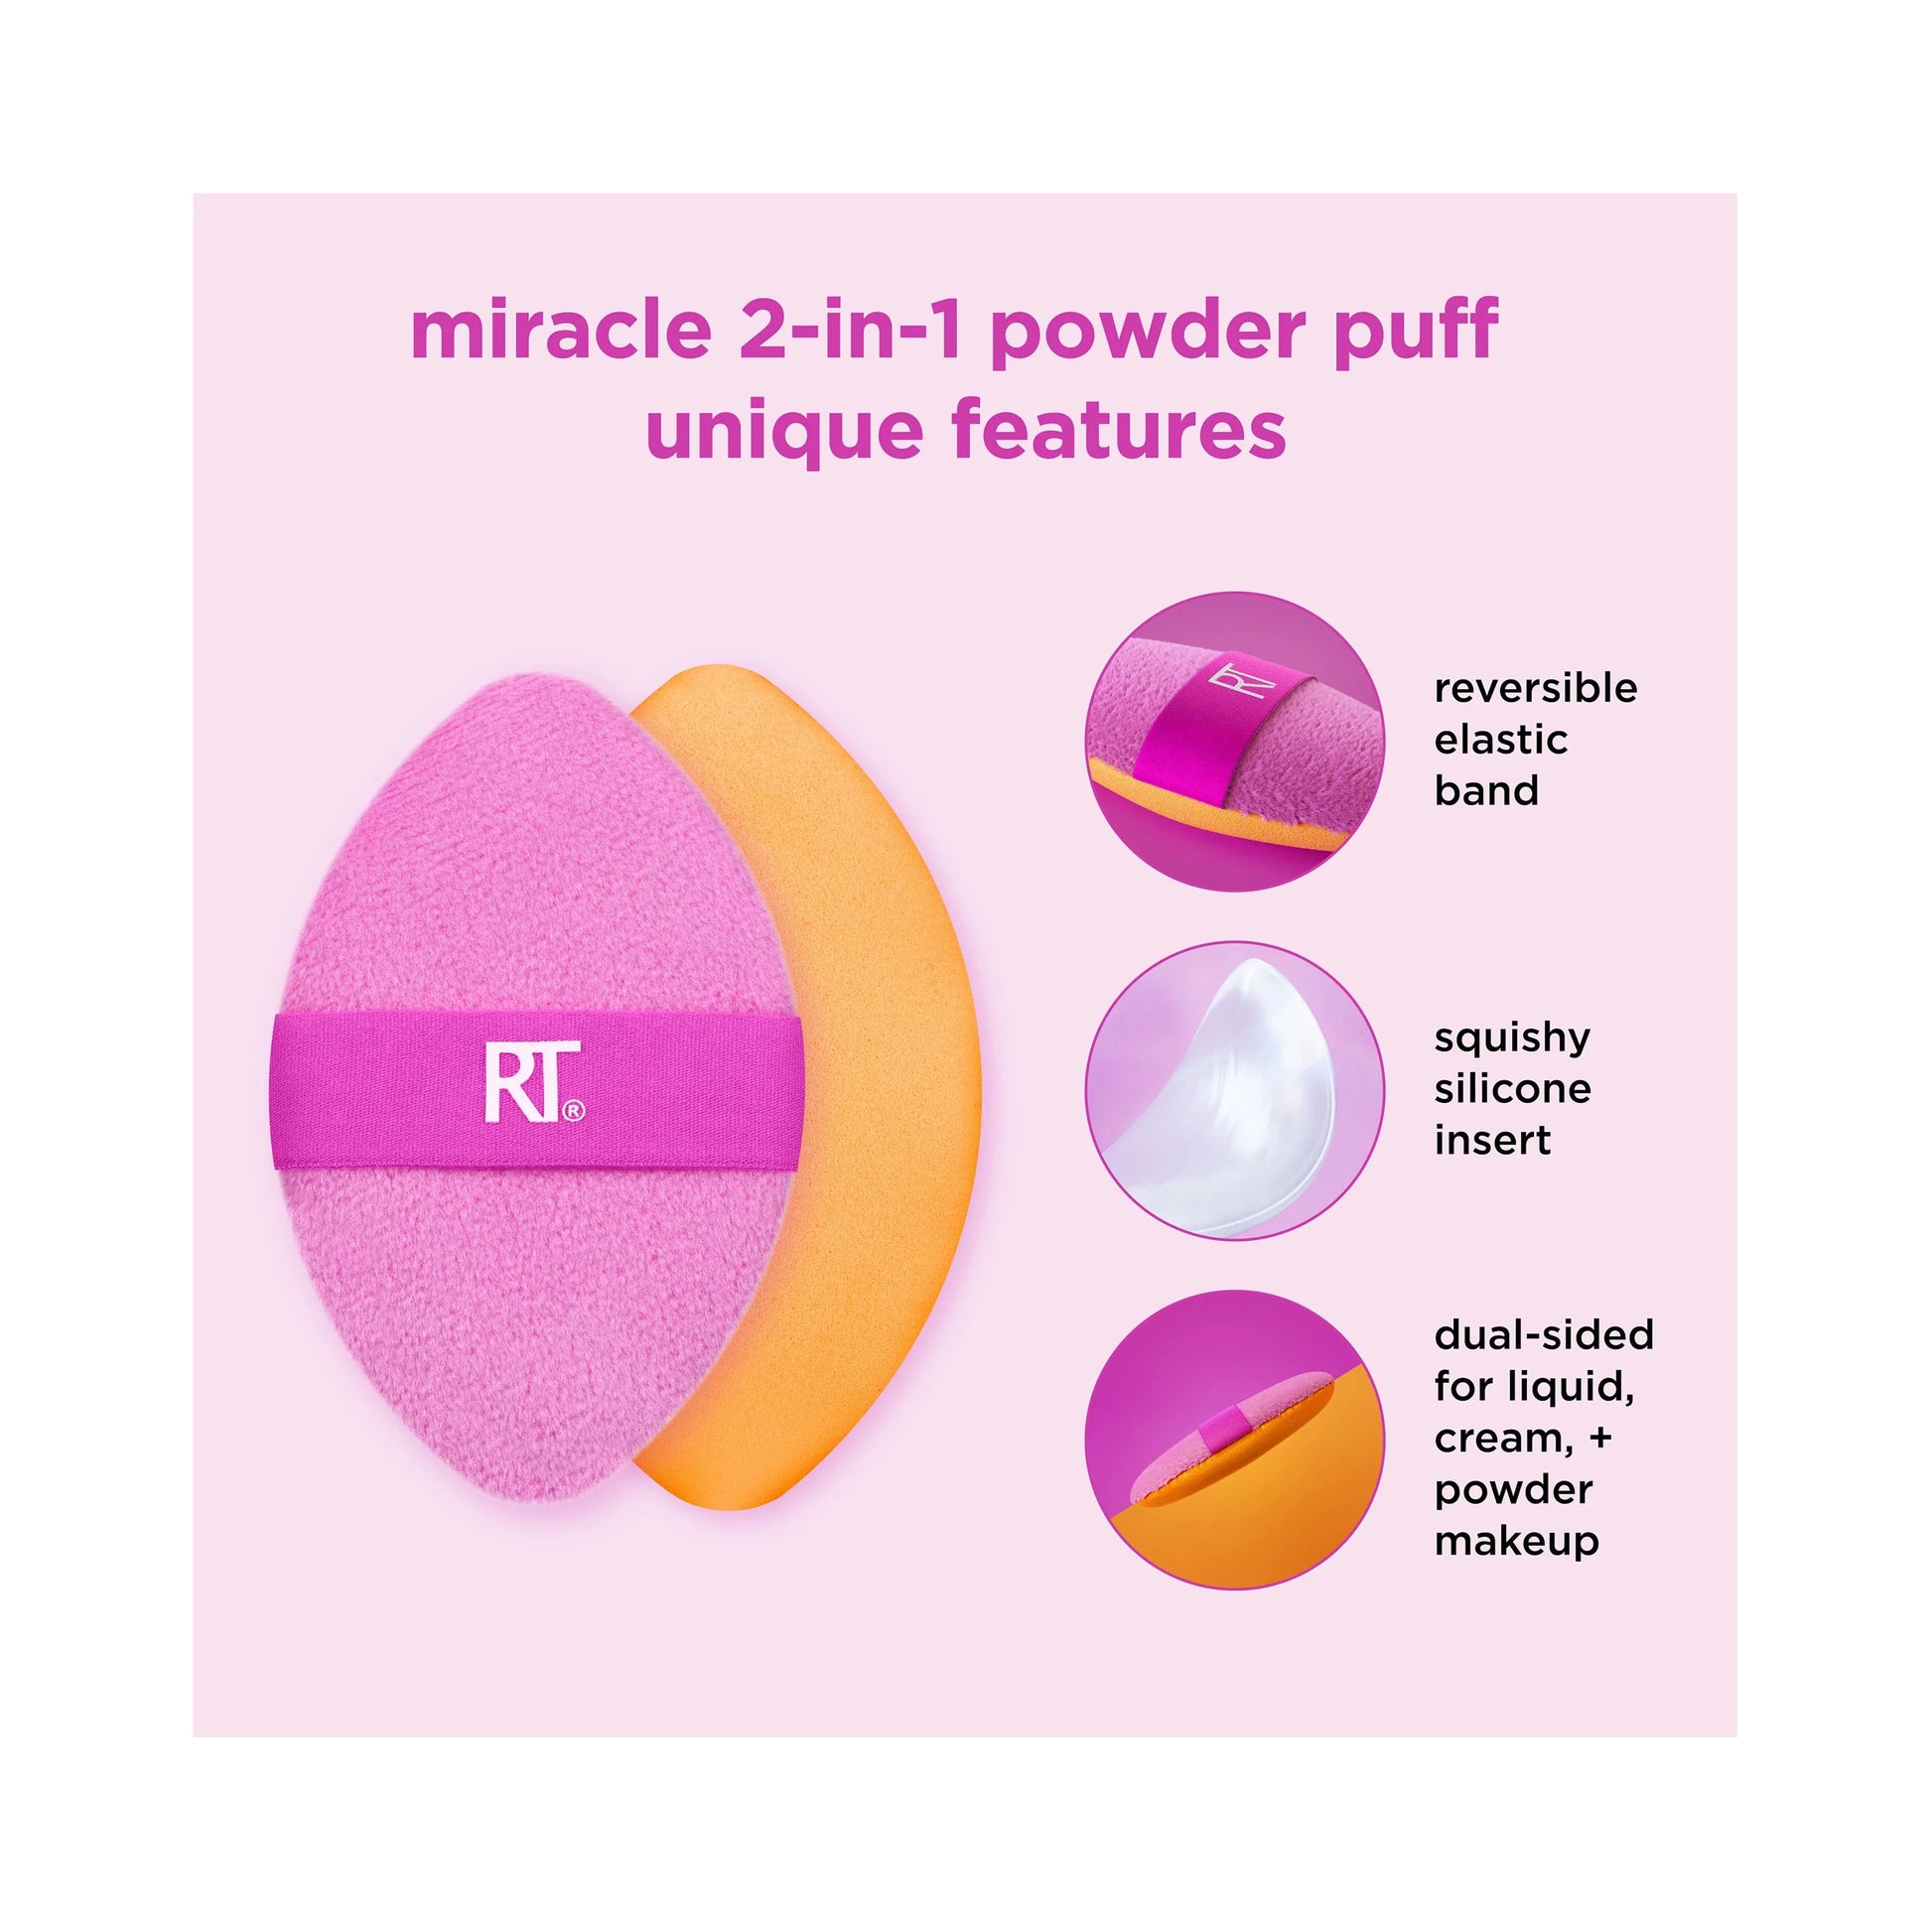 Real Techniques Miracle 2-In-1 Powder Puff